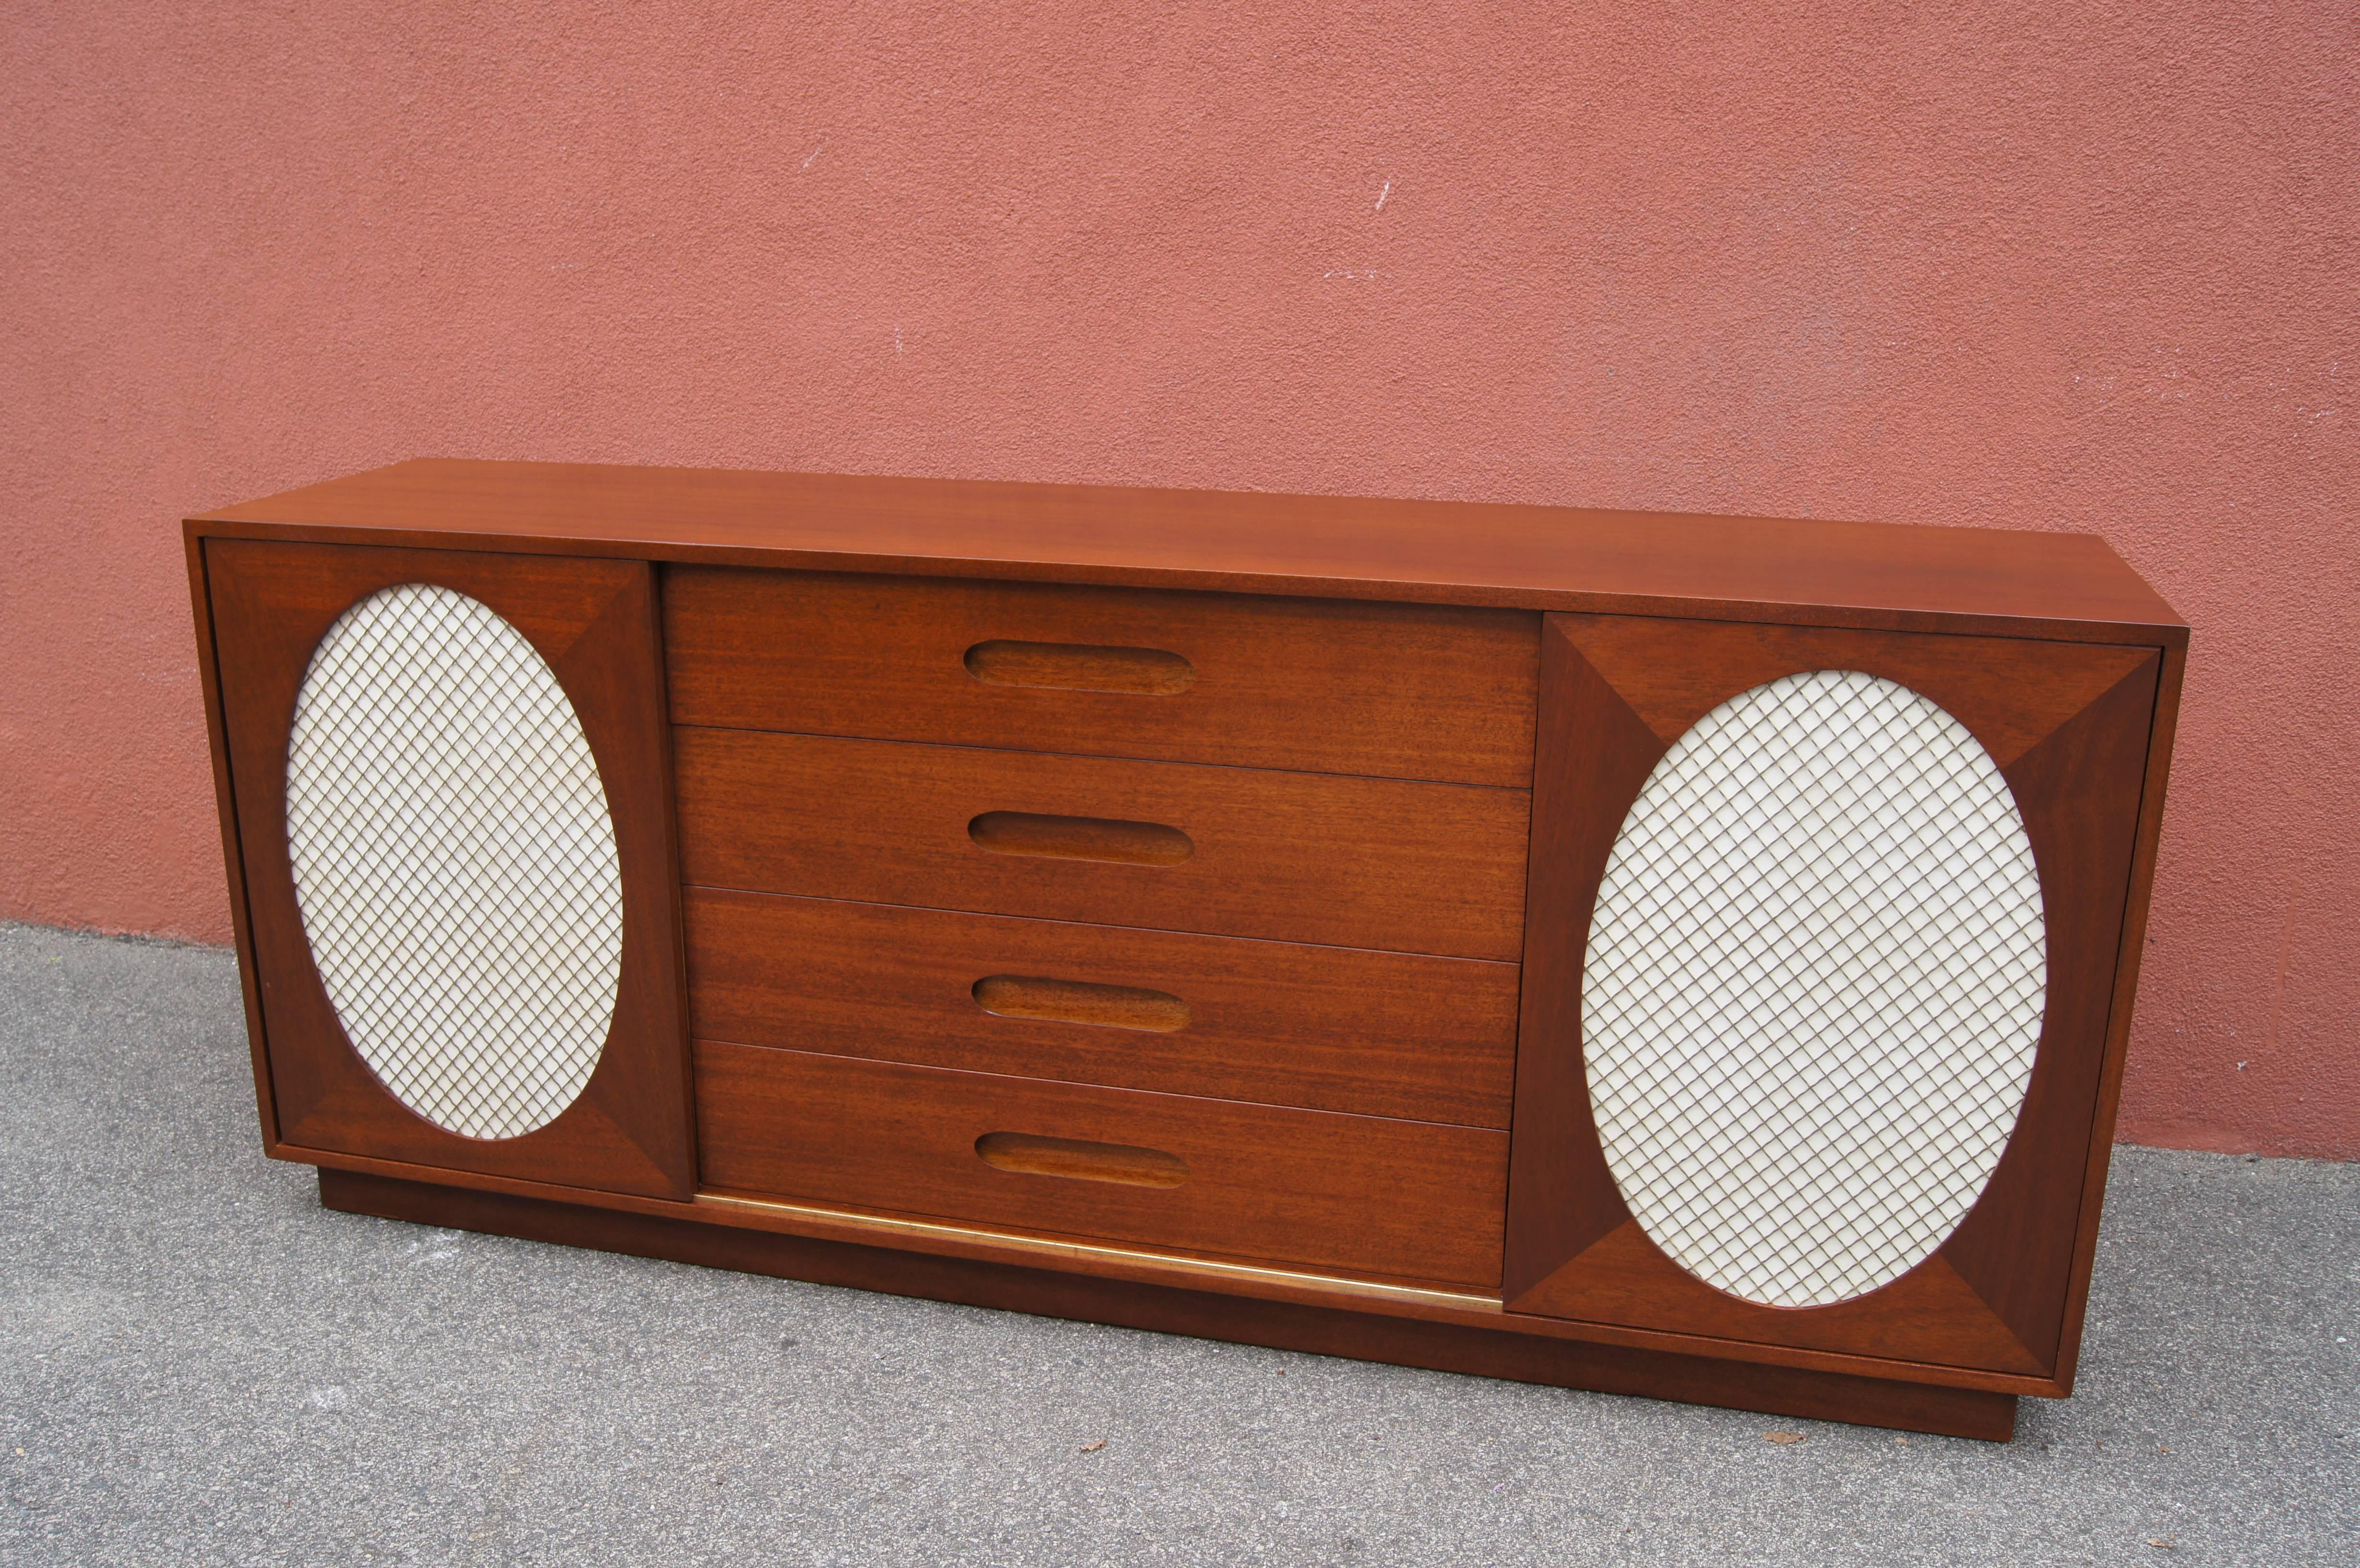 This is a striking version of one of Harvey Probber's 1950s mahogany sideboards. At center are four large drawers with wide inset handles; the top drawer is divided into five sections and the one below into three. Two sliding panels with oval mesh